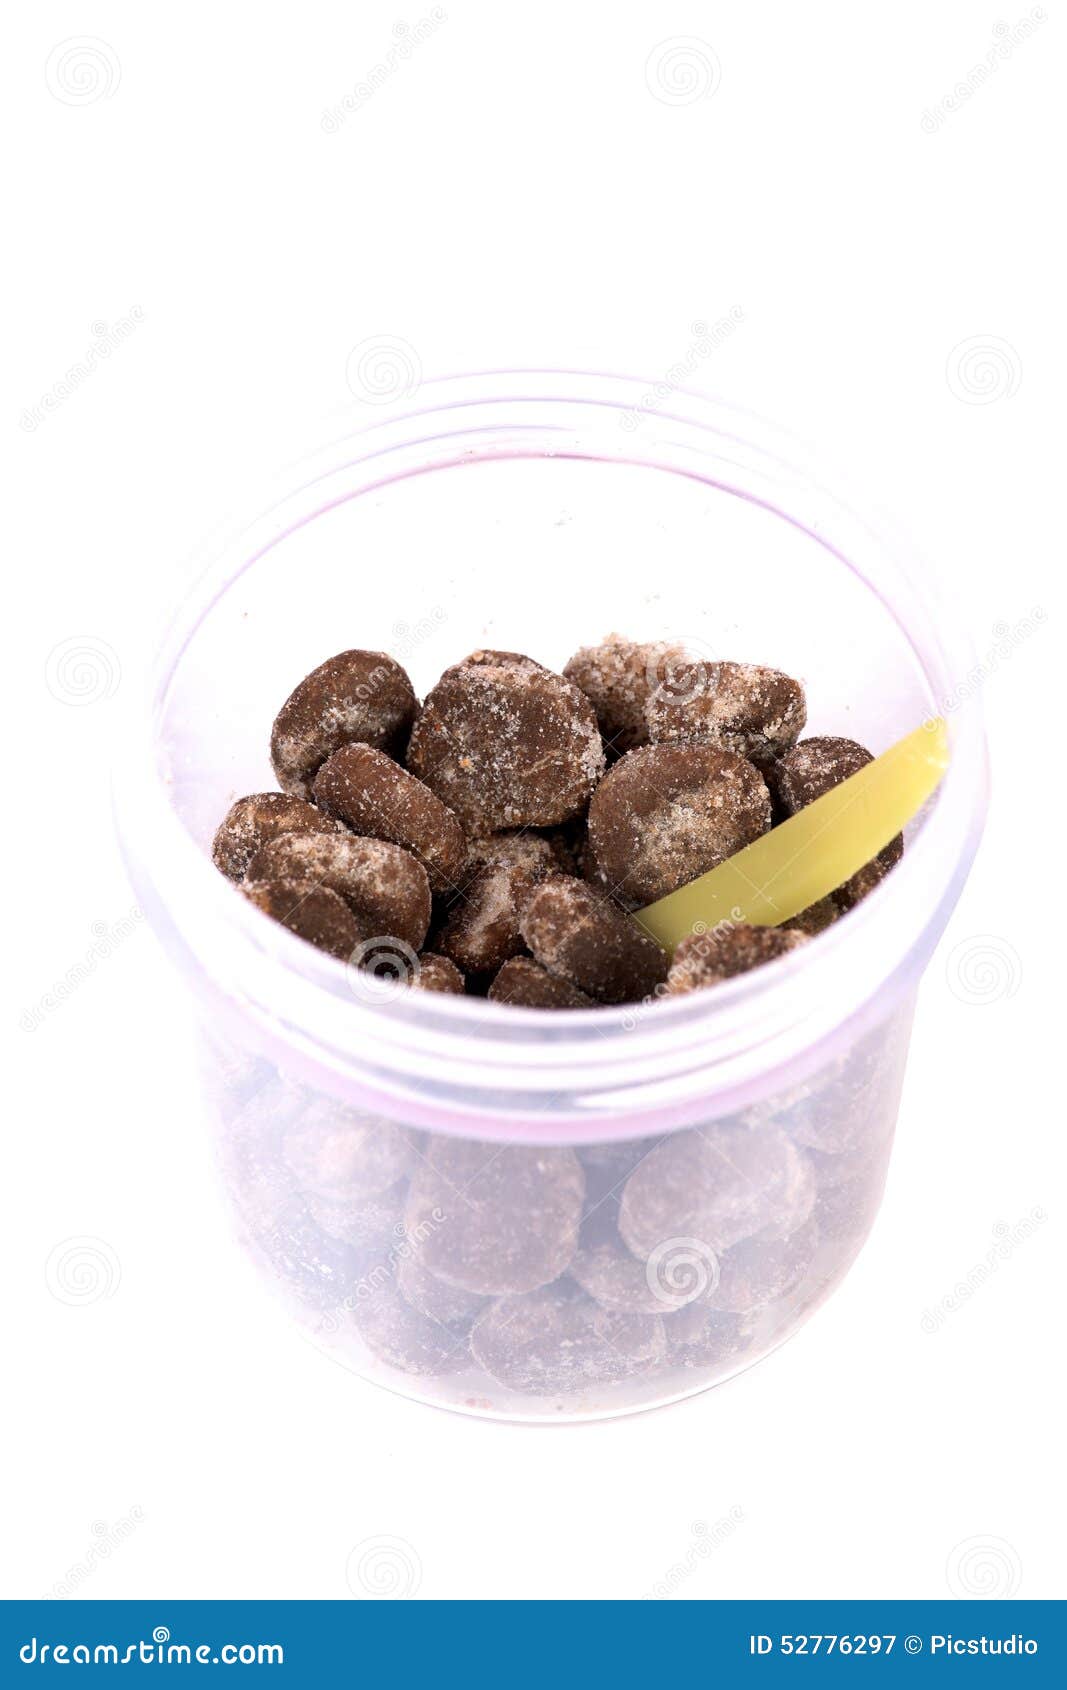 233 Tamarind Balls Photos Free Royalty Free Stock Photos From Dreamstime